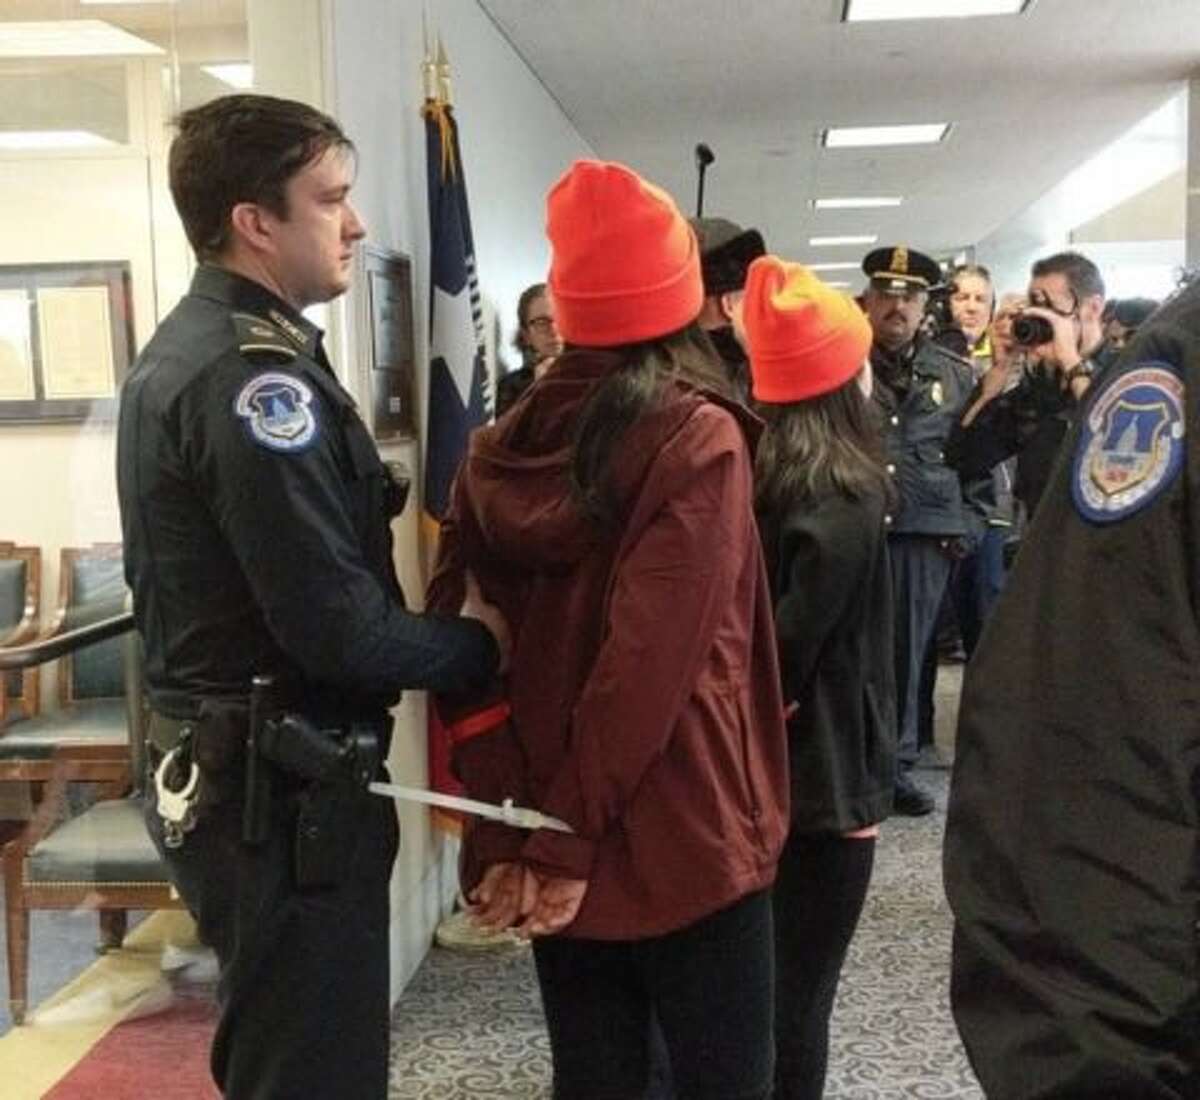 Five protesters were arrested outside the office of U.S. Sen. John Cornyn, R-Texas, while dozens of others were arrested at other senators' offices. The protestors were pushing for a bill that would codify an Obama-era executive order protecting certain young immigrants from deportation.